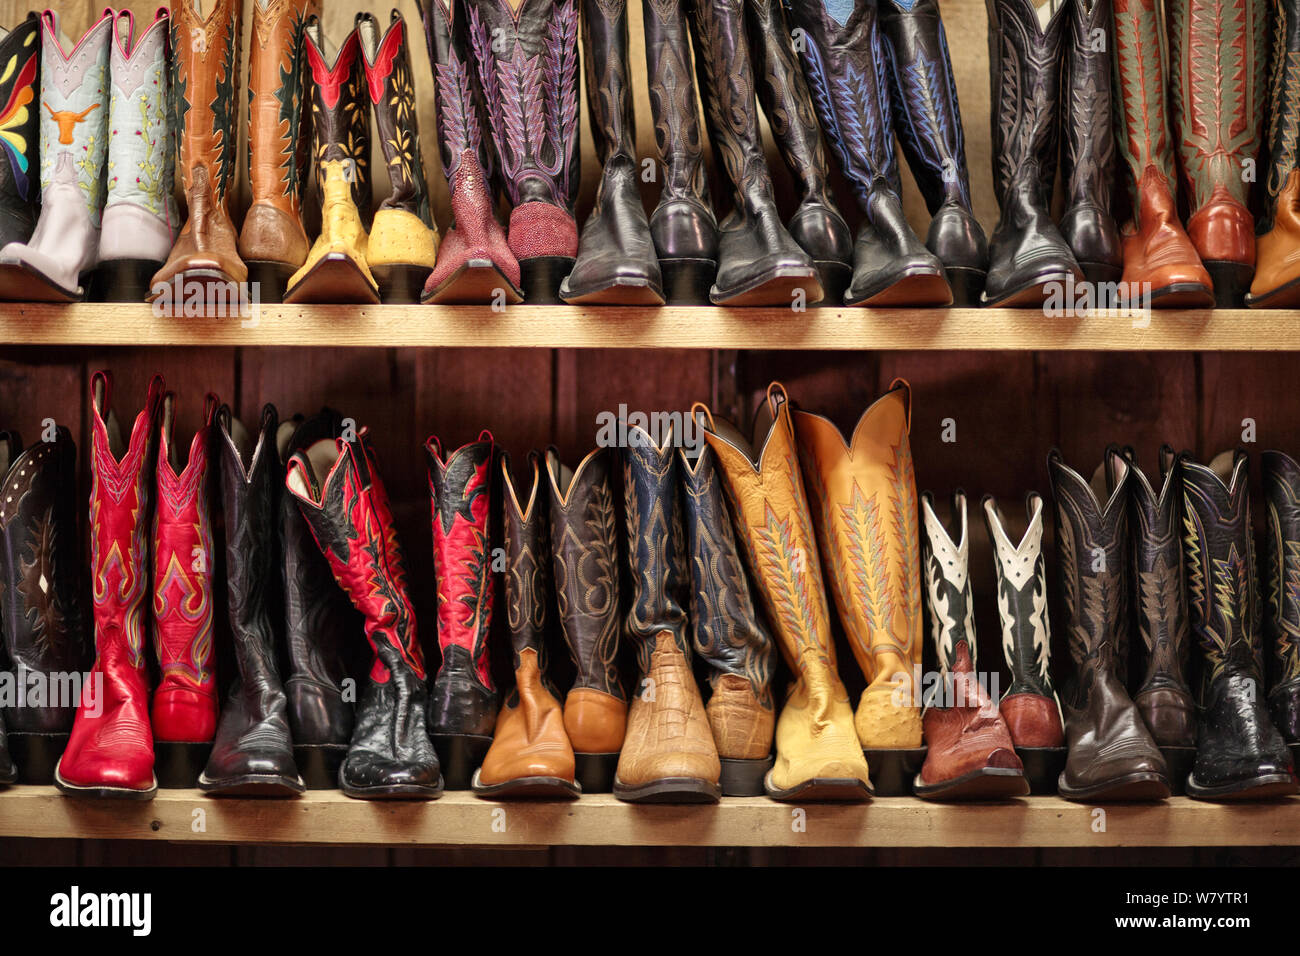 Rows of cowboy boots lined up on shelves. Stock Photo